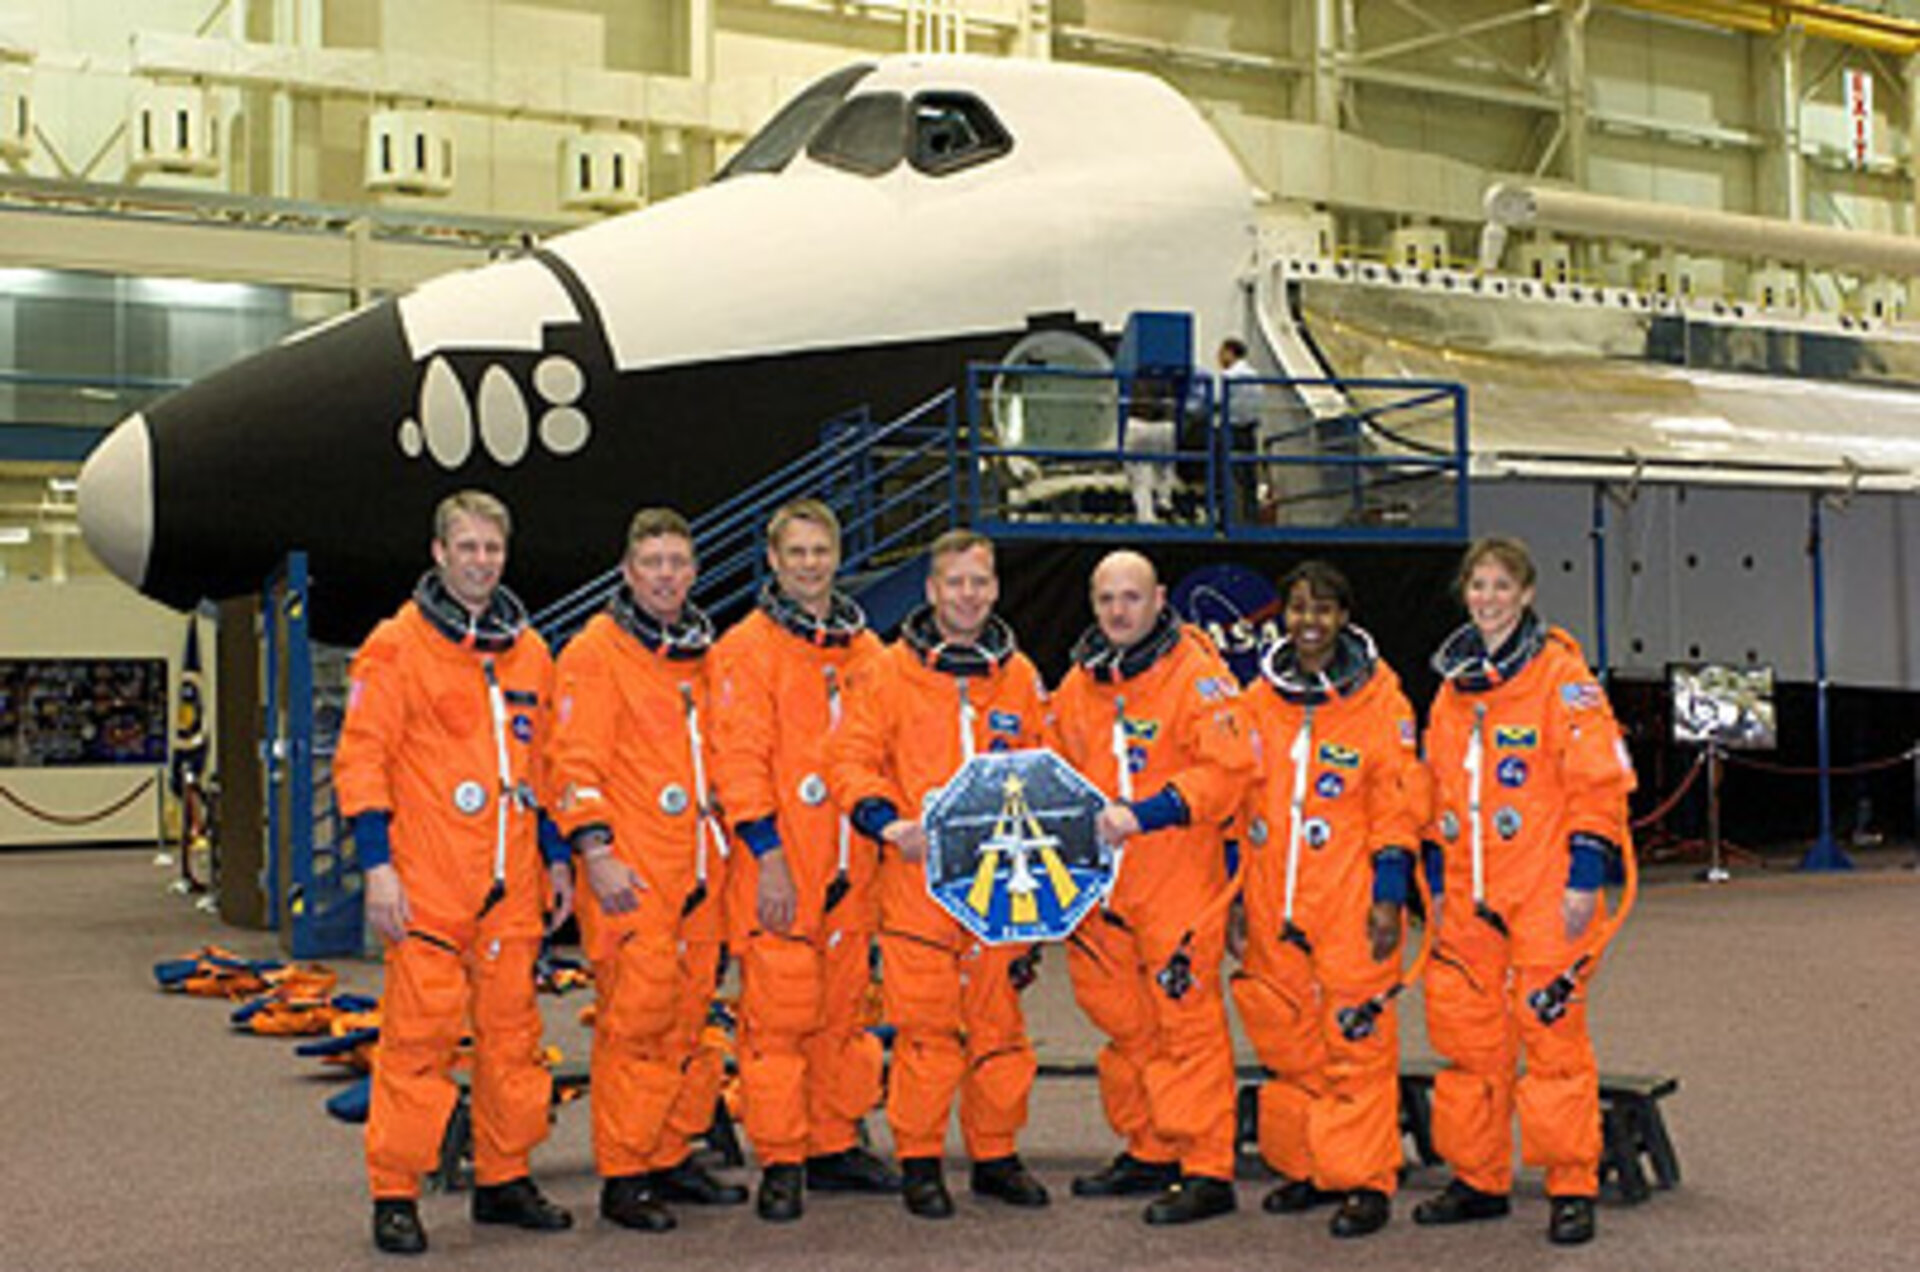 Crew assigned to STS-121 mission